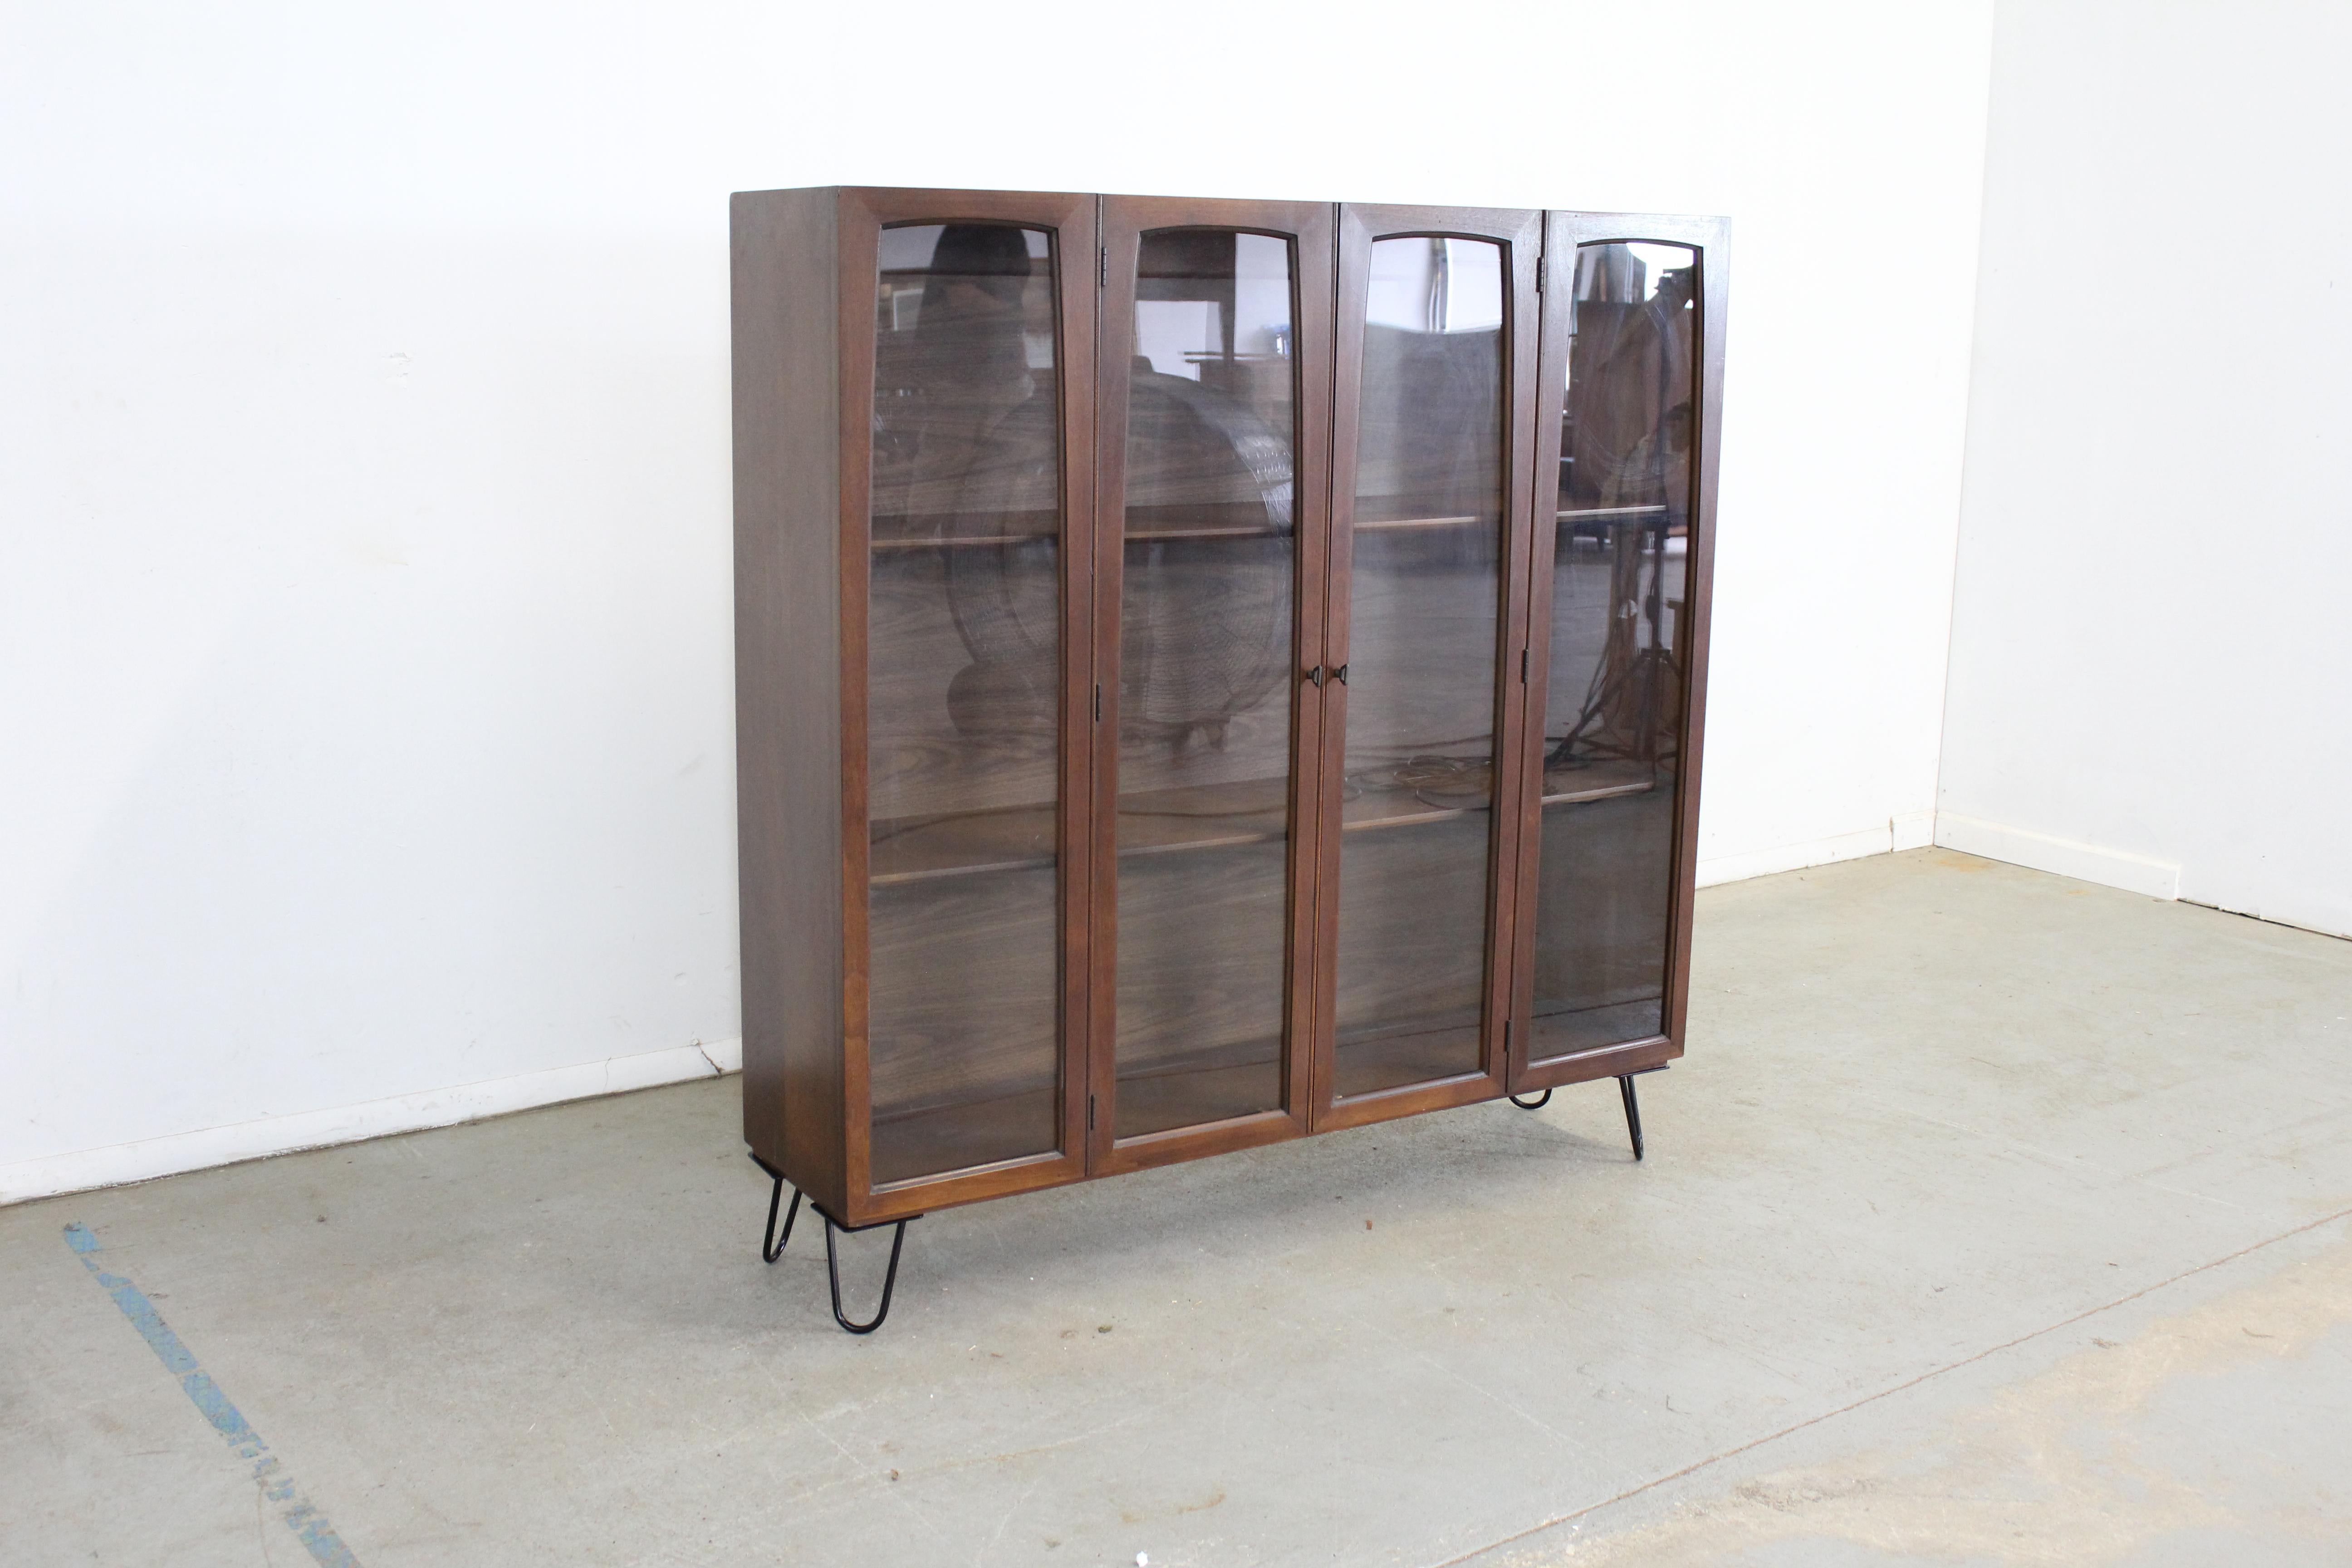 Danish modern walnut shelving unit 

Offered is a Danish modern walnut shelving unit. It has three shelving sections. It also feature two glass sliding doors that fold for efficiency. It is structurally sound with some minor fading and scratches